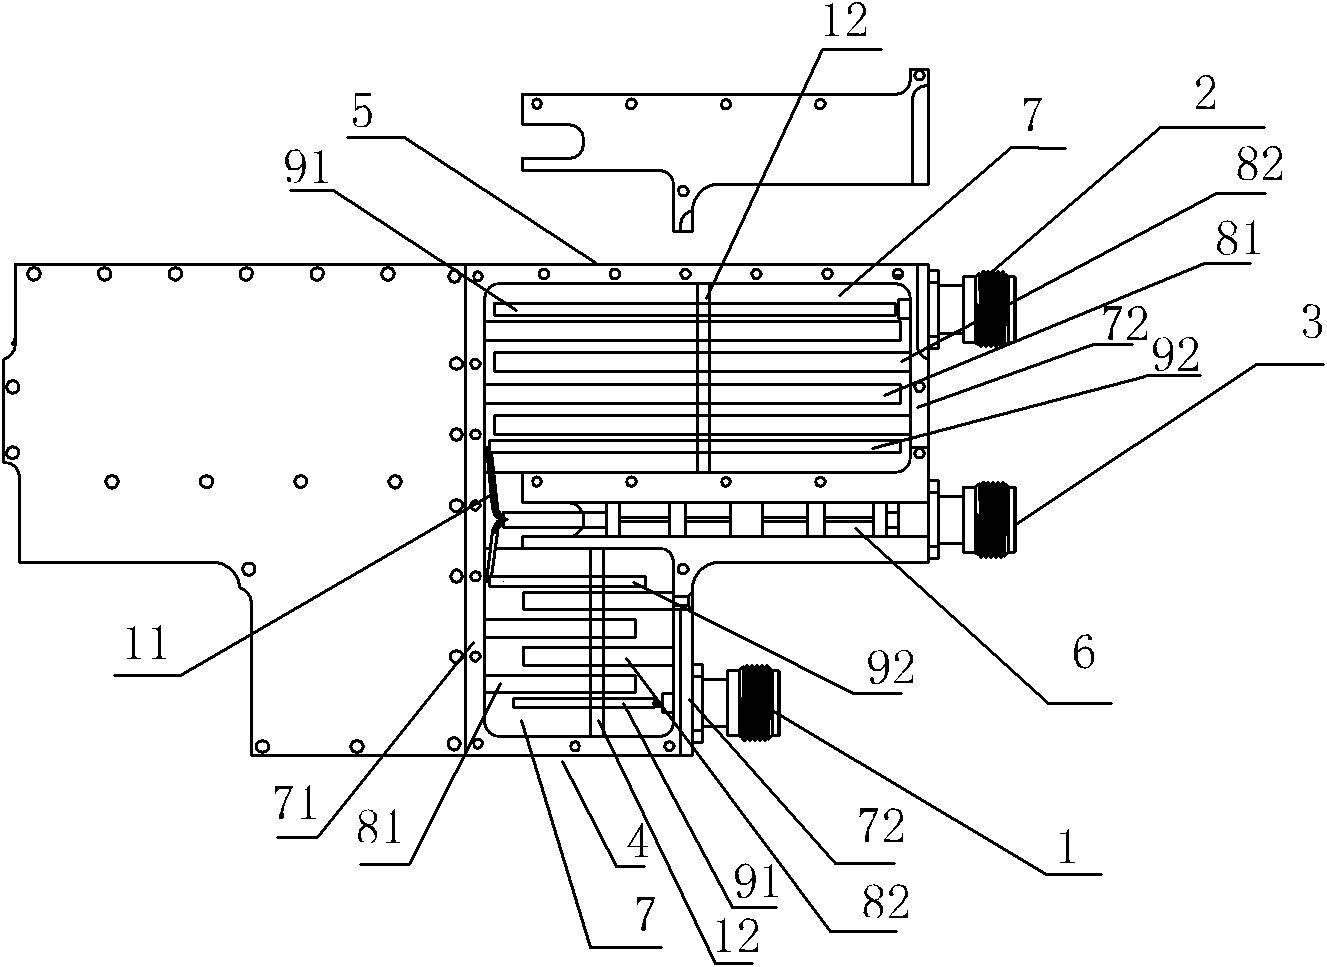 Combiner for ultra-wideband wireless communication